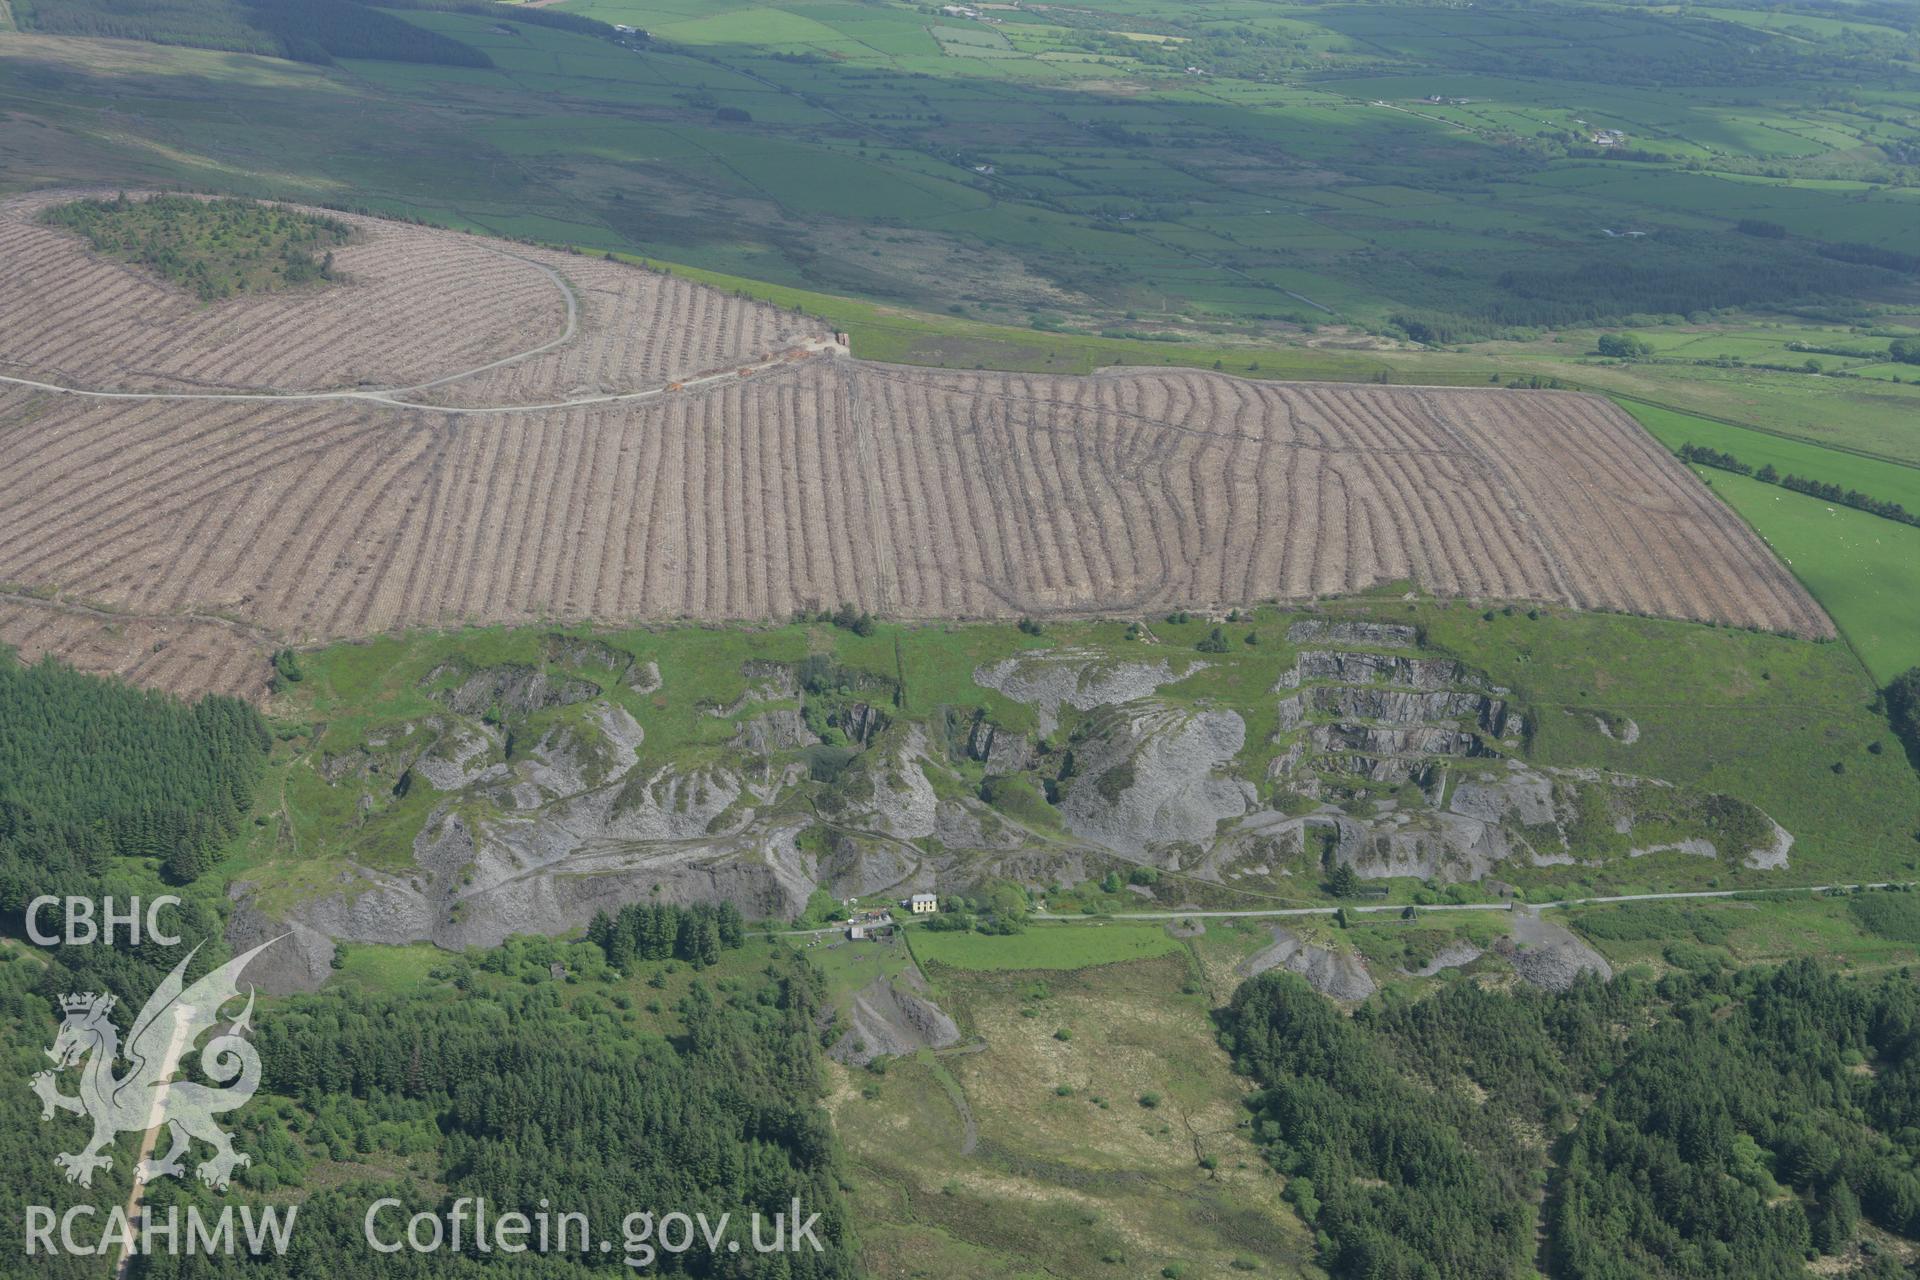 RCAHMW colour oblique photograph of Rosebush and Precelly (Bellstone) Quarry. Taken by Toby Driver on 20/05/2008.